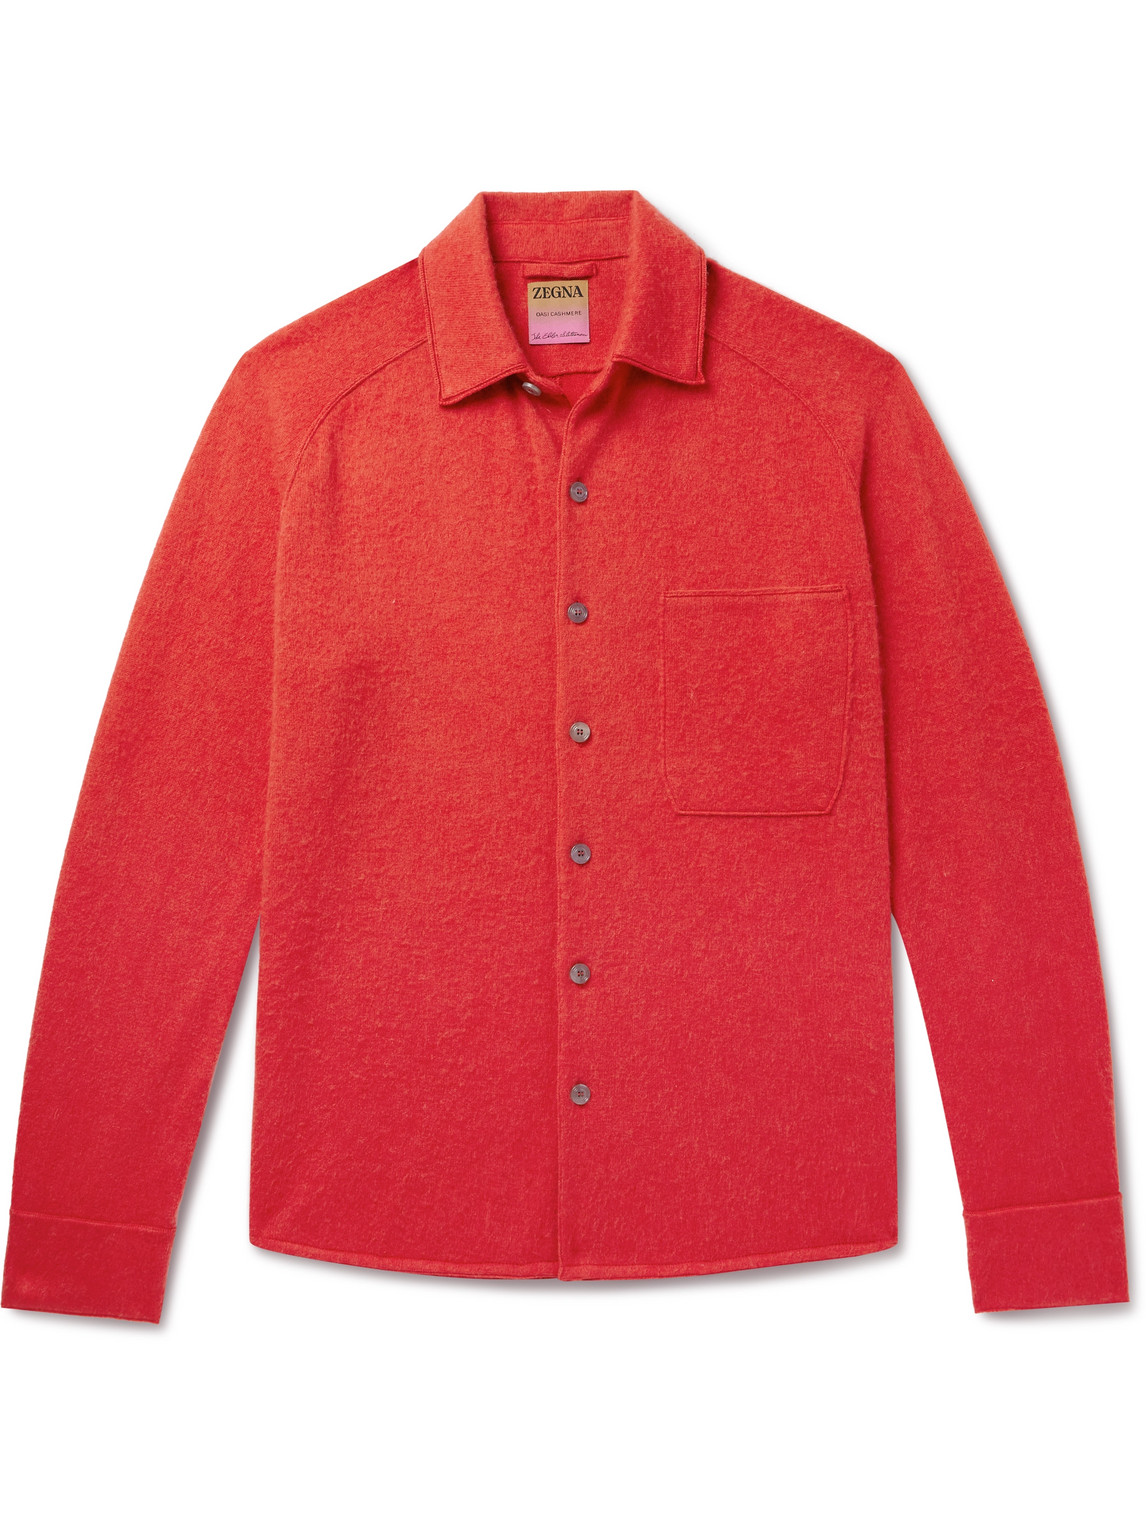 Zegna X The Elder Statesman Brushed Oasi Cashmere Shirt In Red